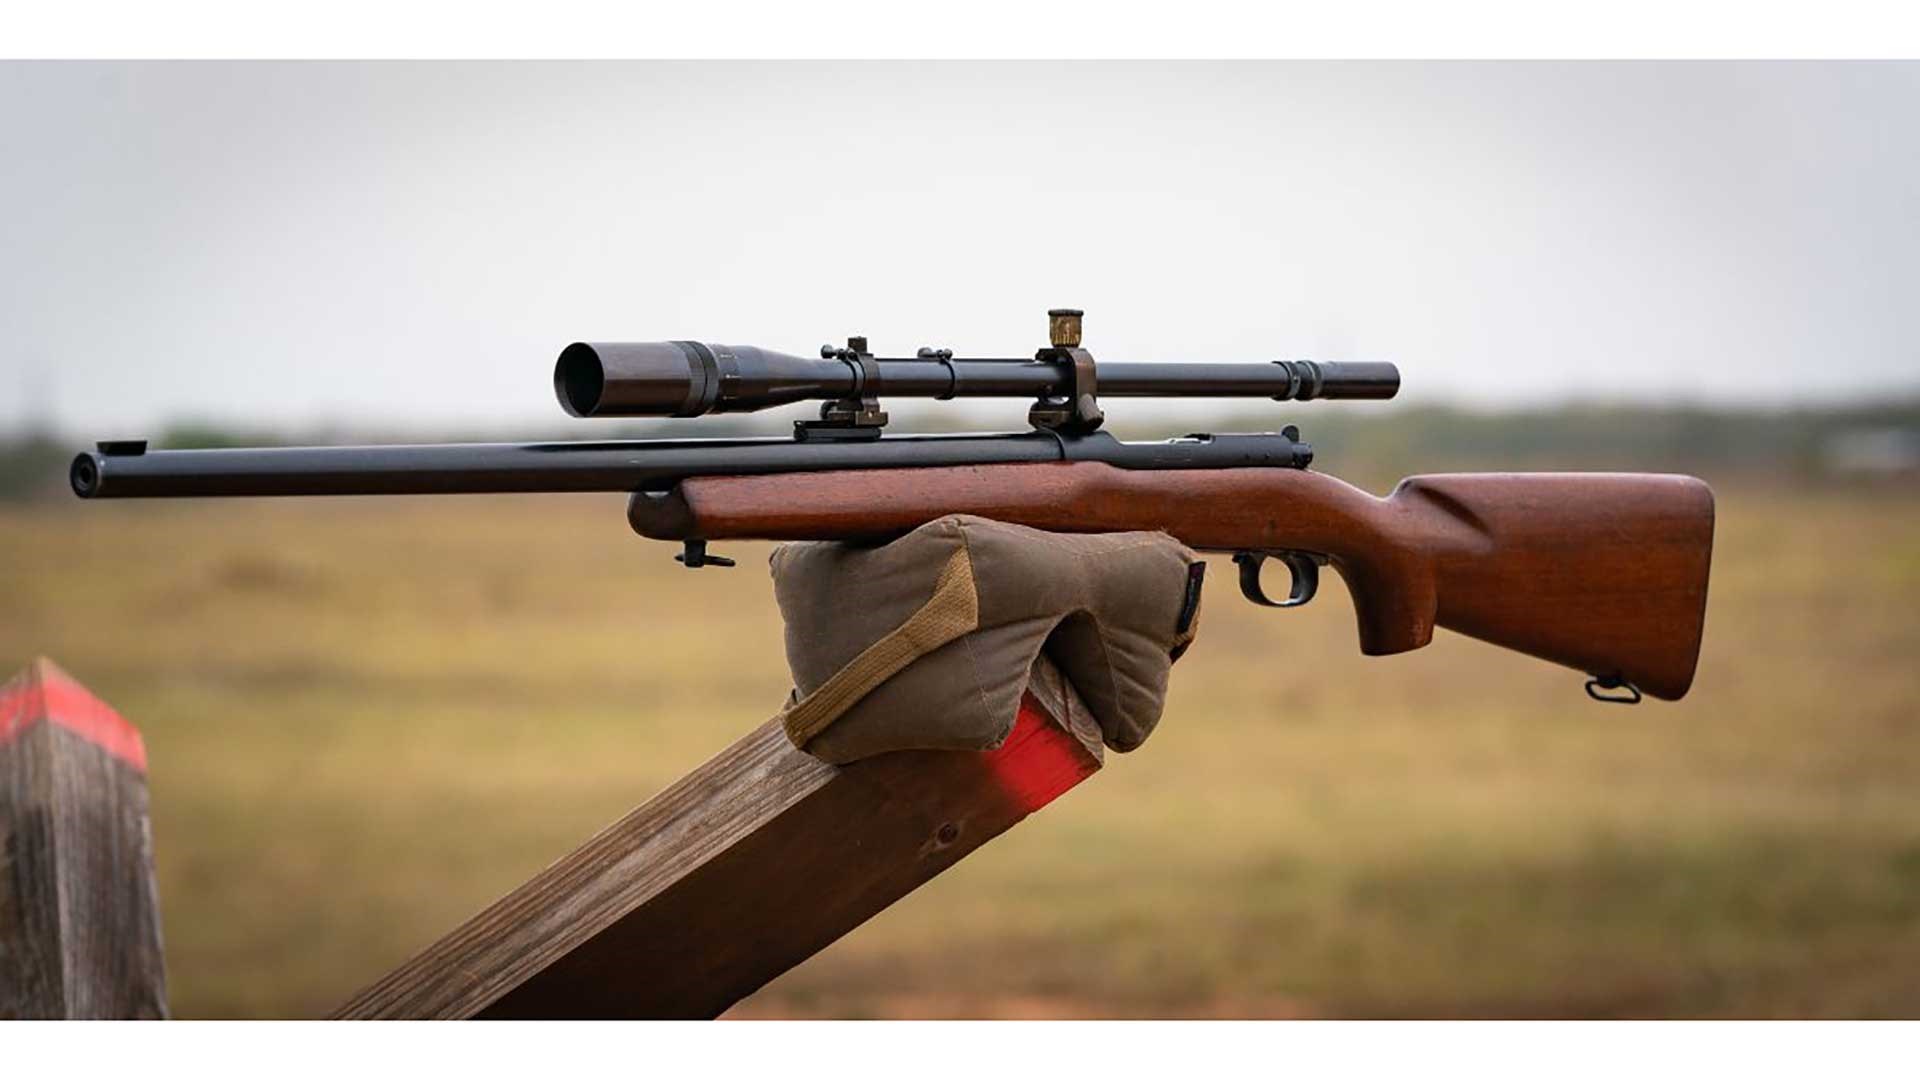 Winchester Model 70 rifle propped on sandbag with a grassy background.